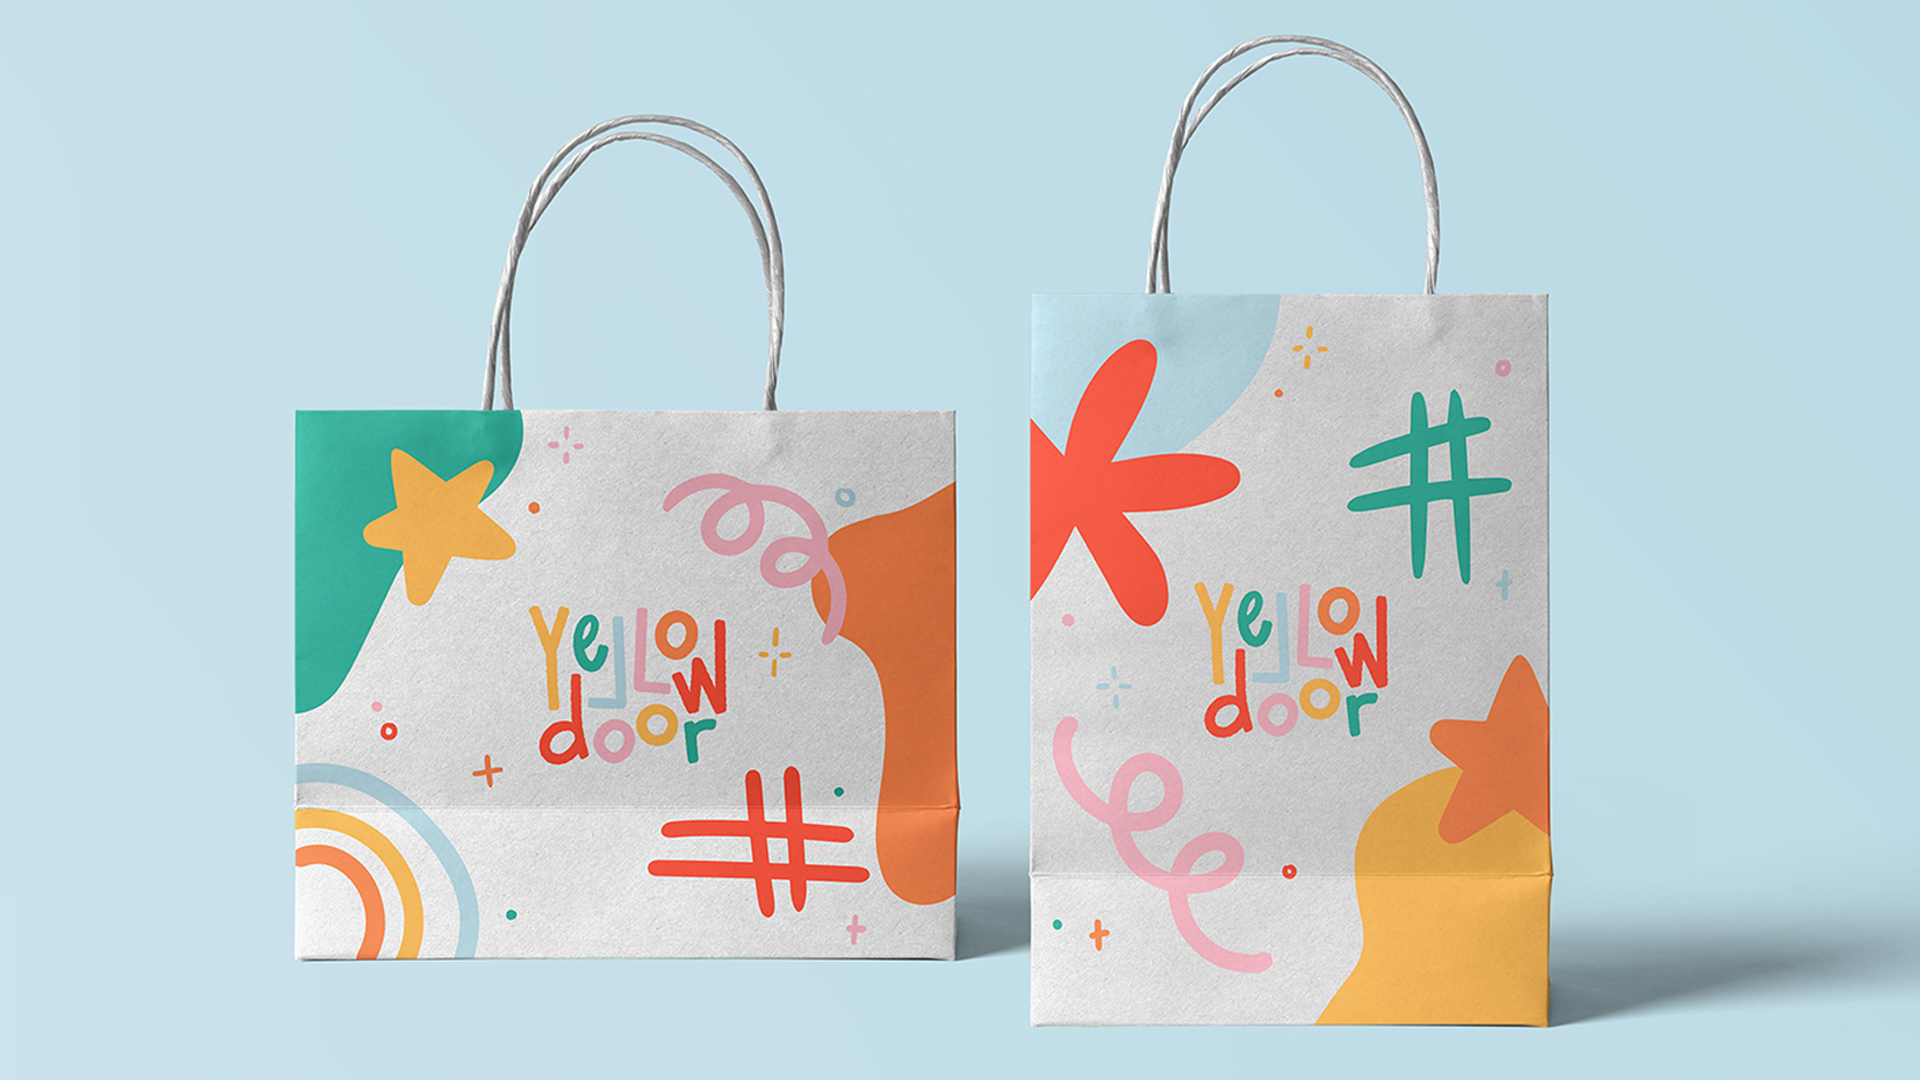 Two white shopping bags with colourful illustrations and logo.